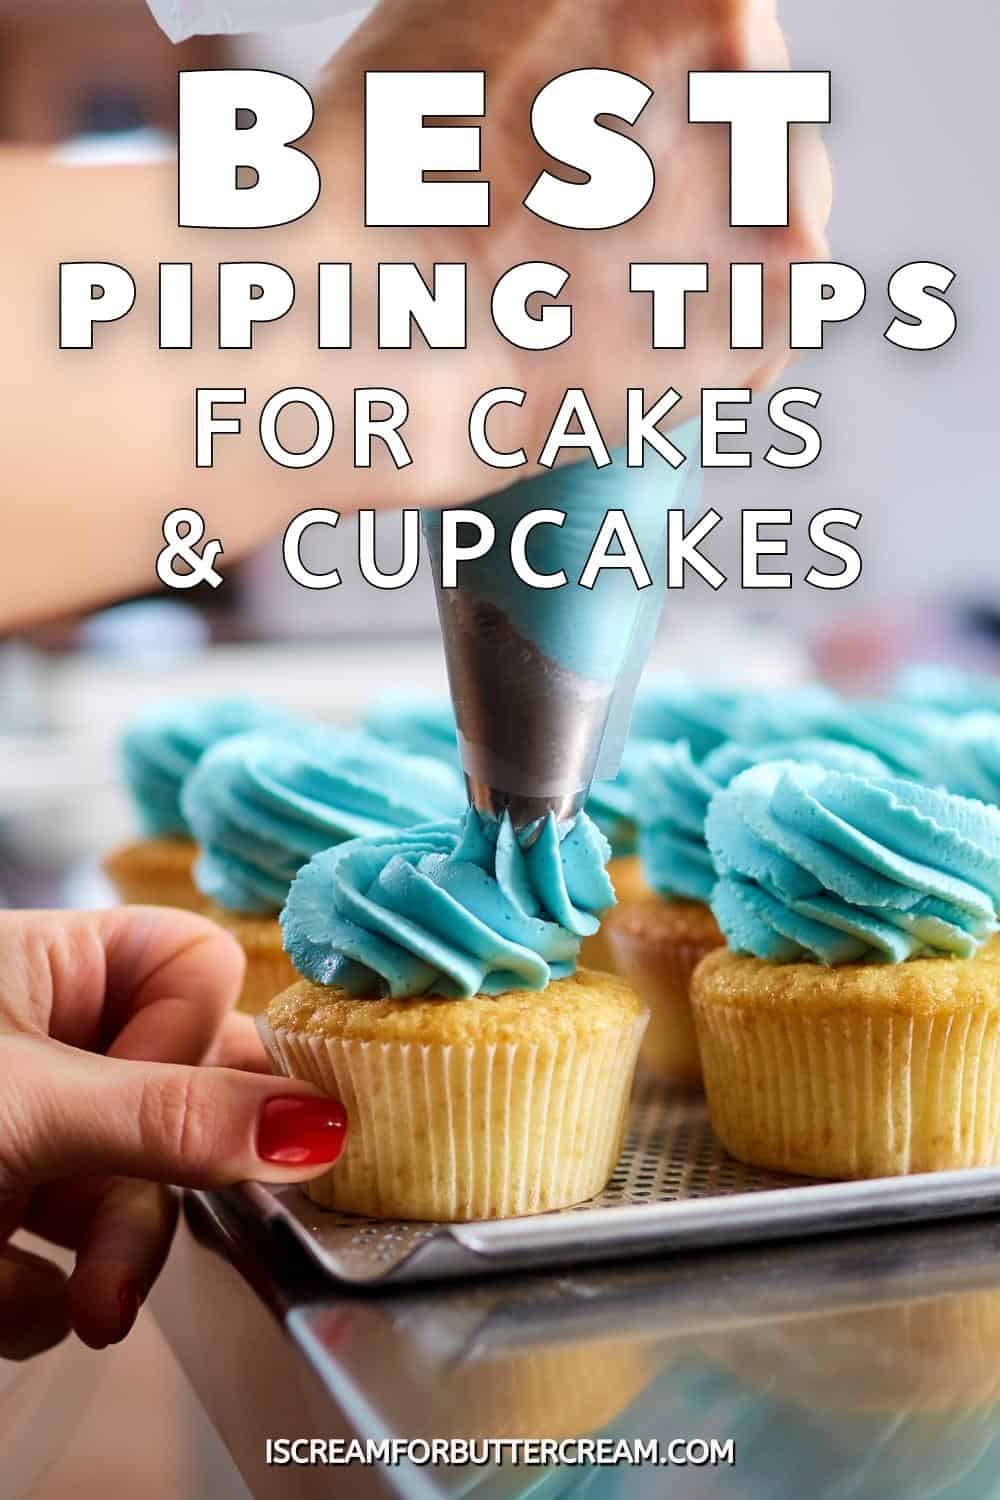 Piping blue frosting onto cupcakes with text overlay.